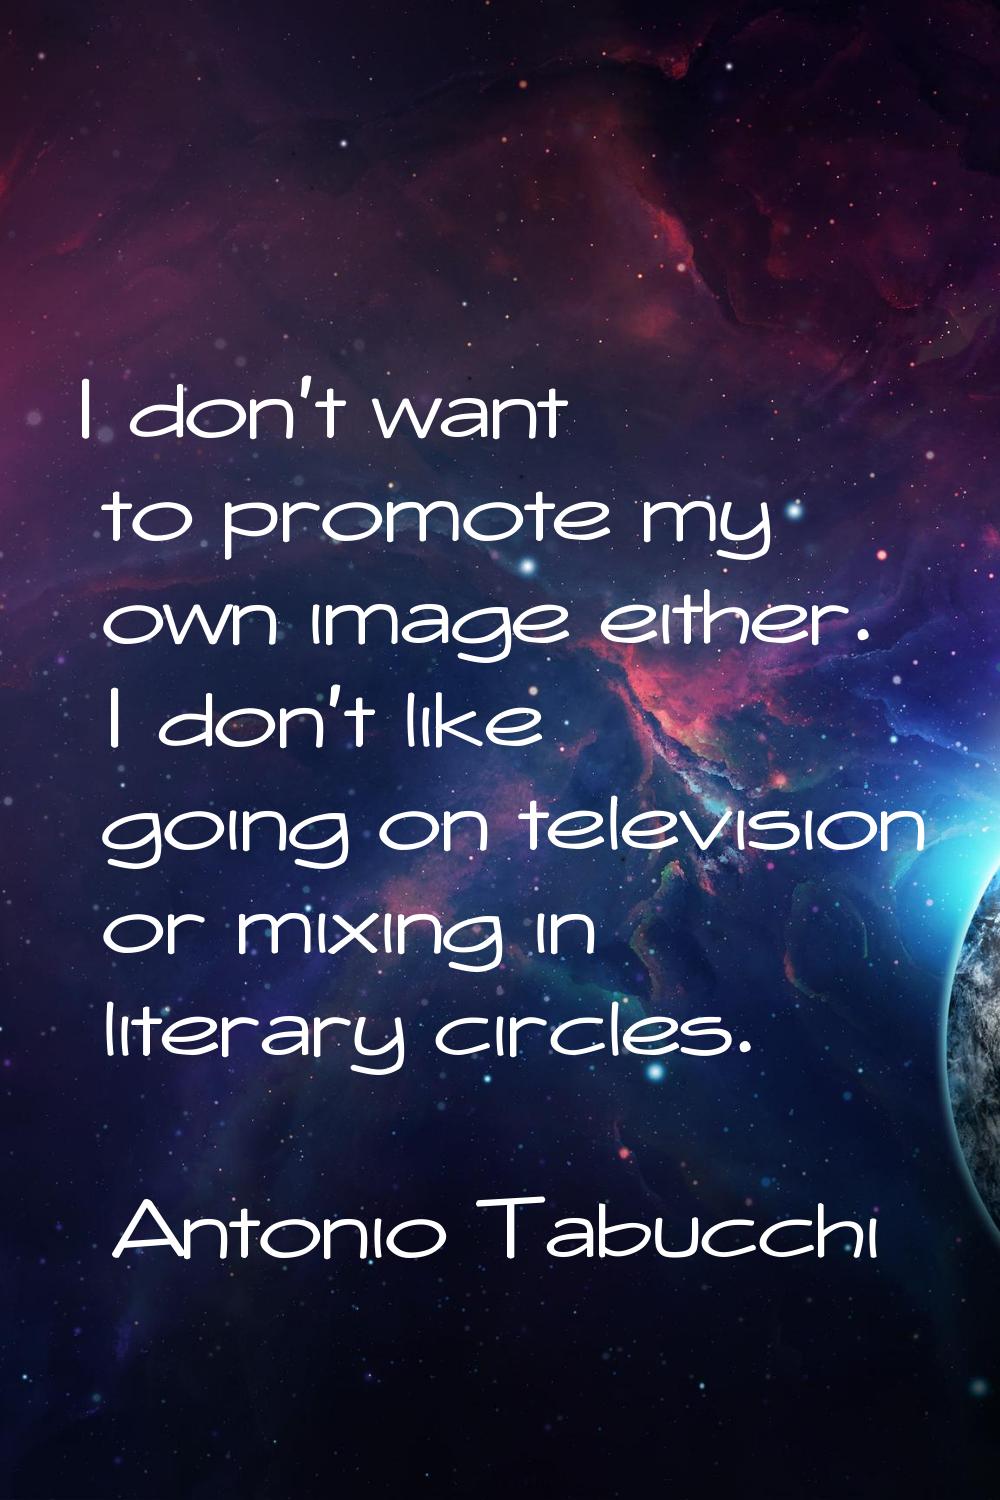 I don't want to promote my own image either. I don't like going on television or mixing in literary